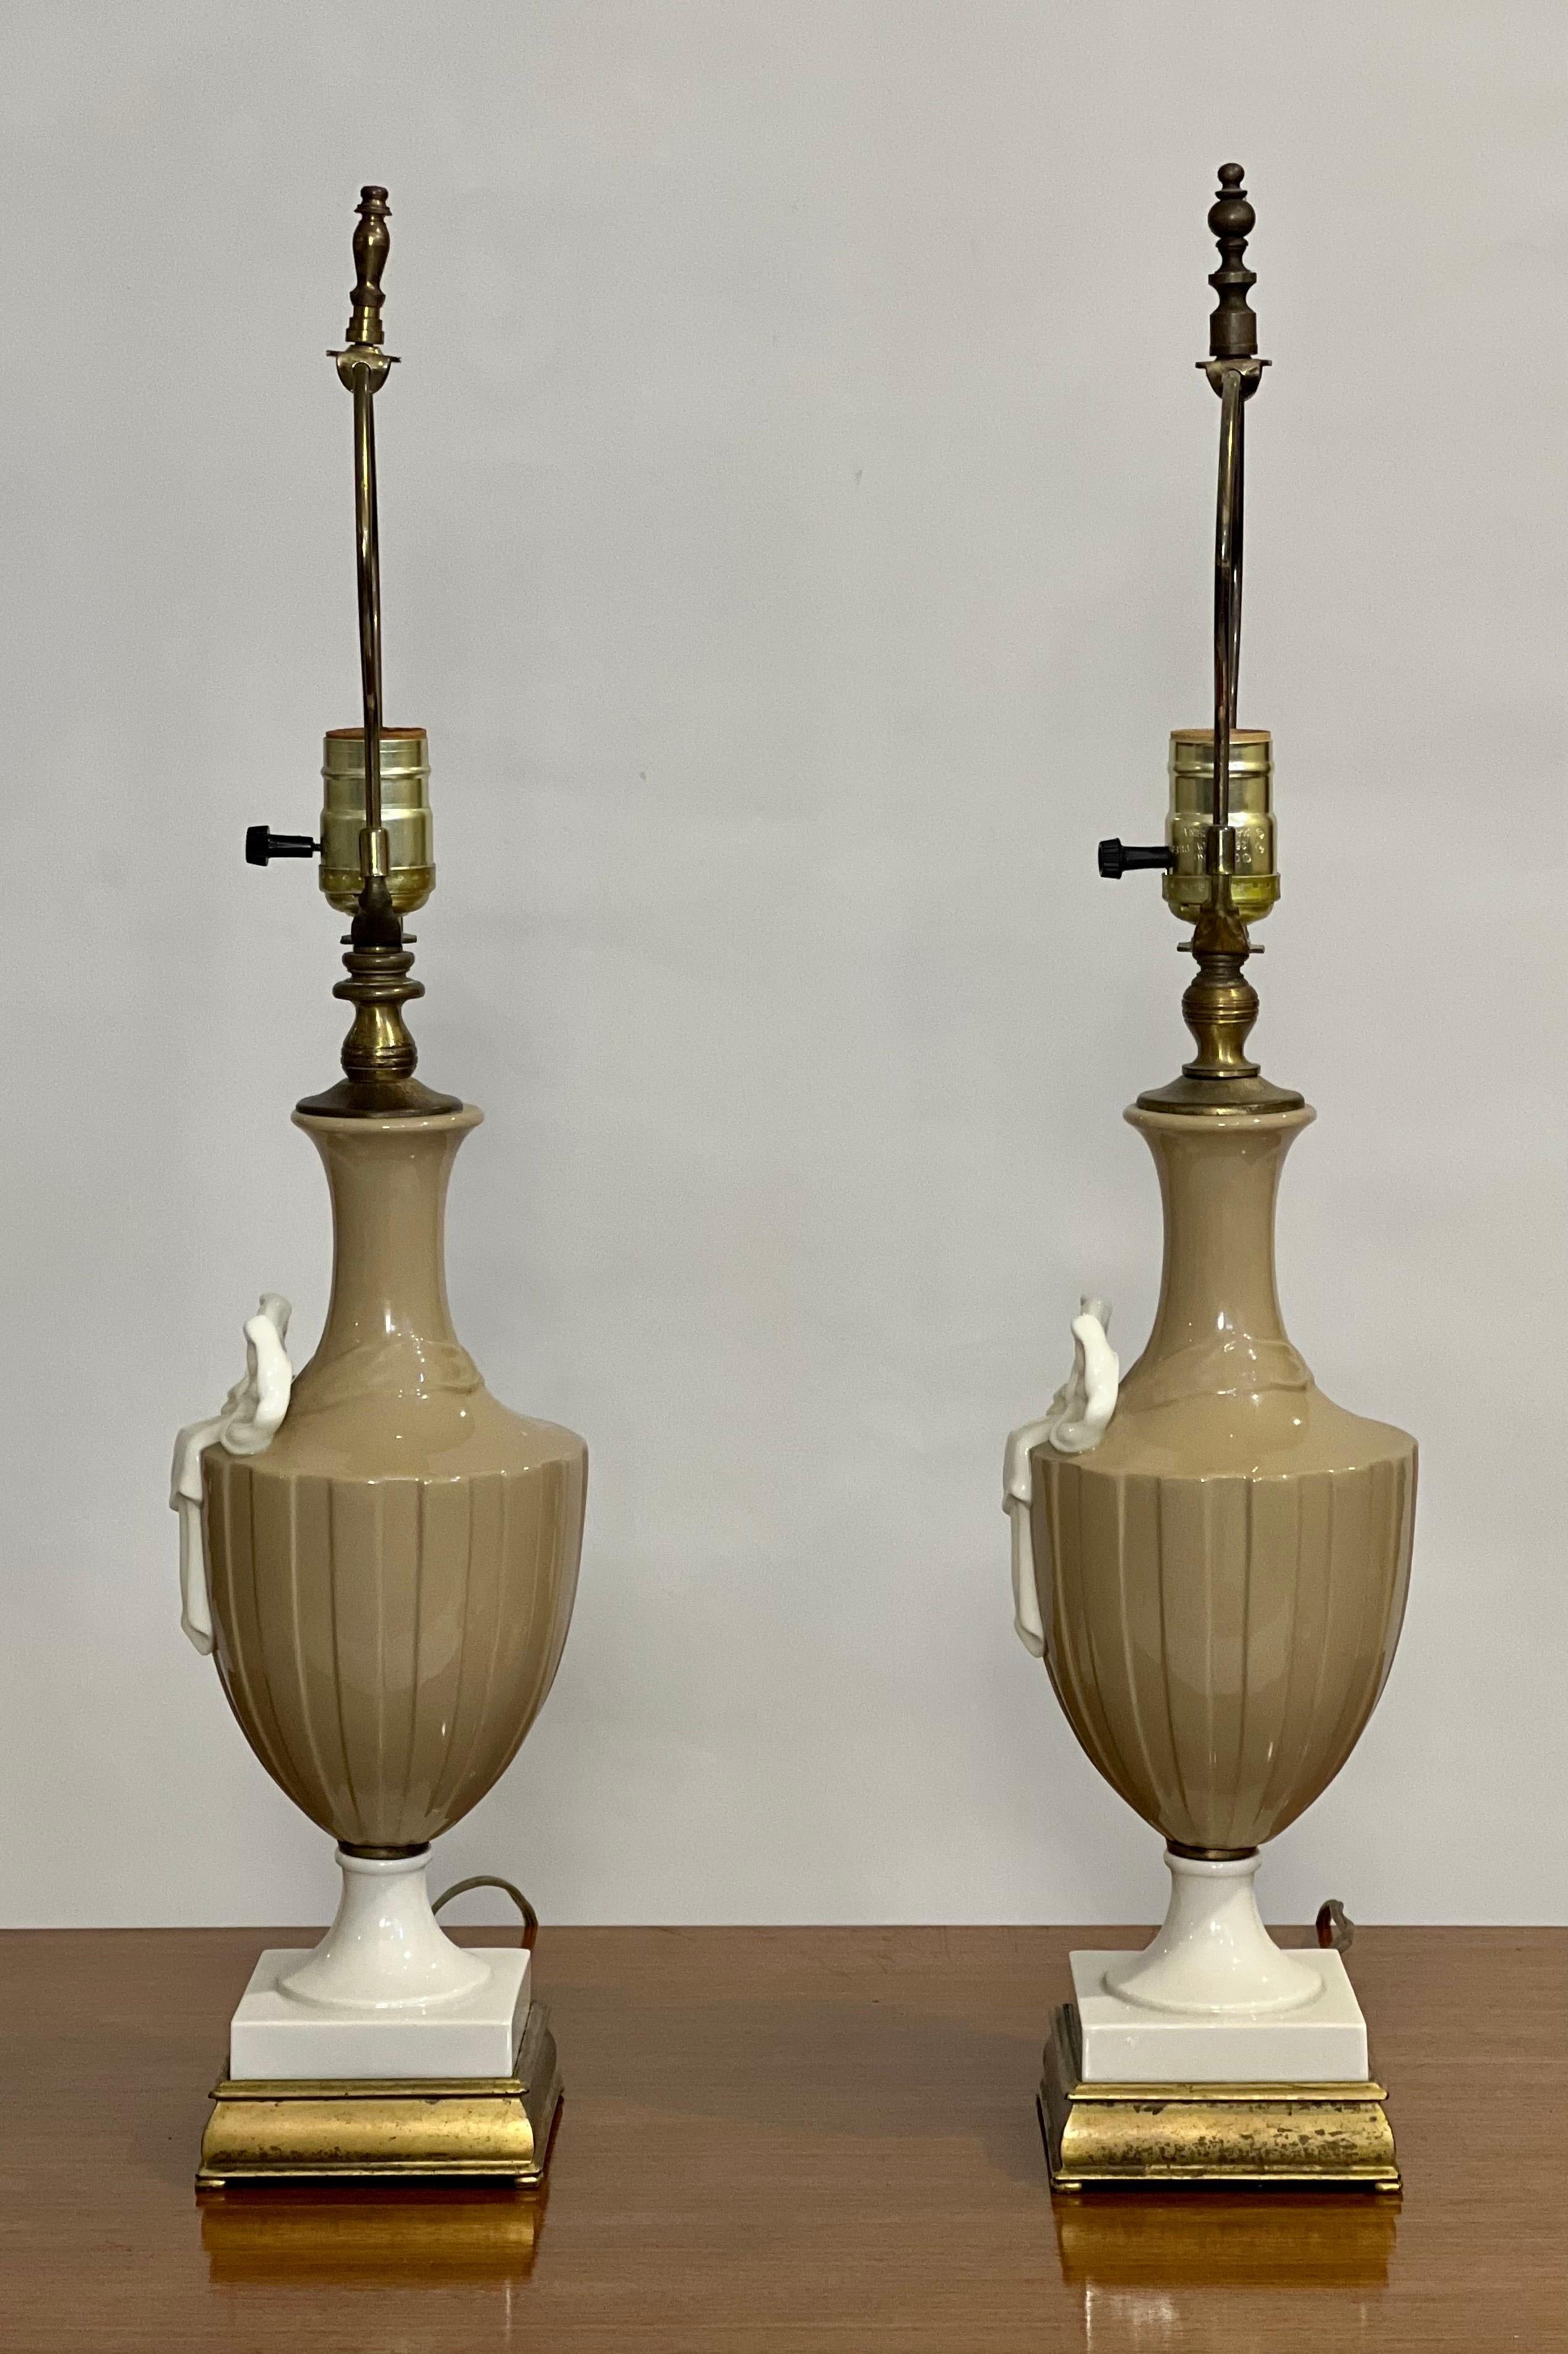 Neoclassical 20th Century Lenox Porcelain Lamps in Taupe and White by Dav Art, NY, Pair For Sale